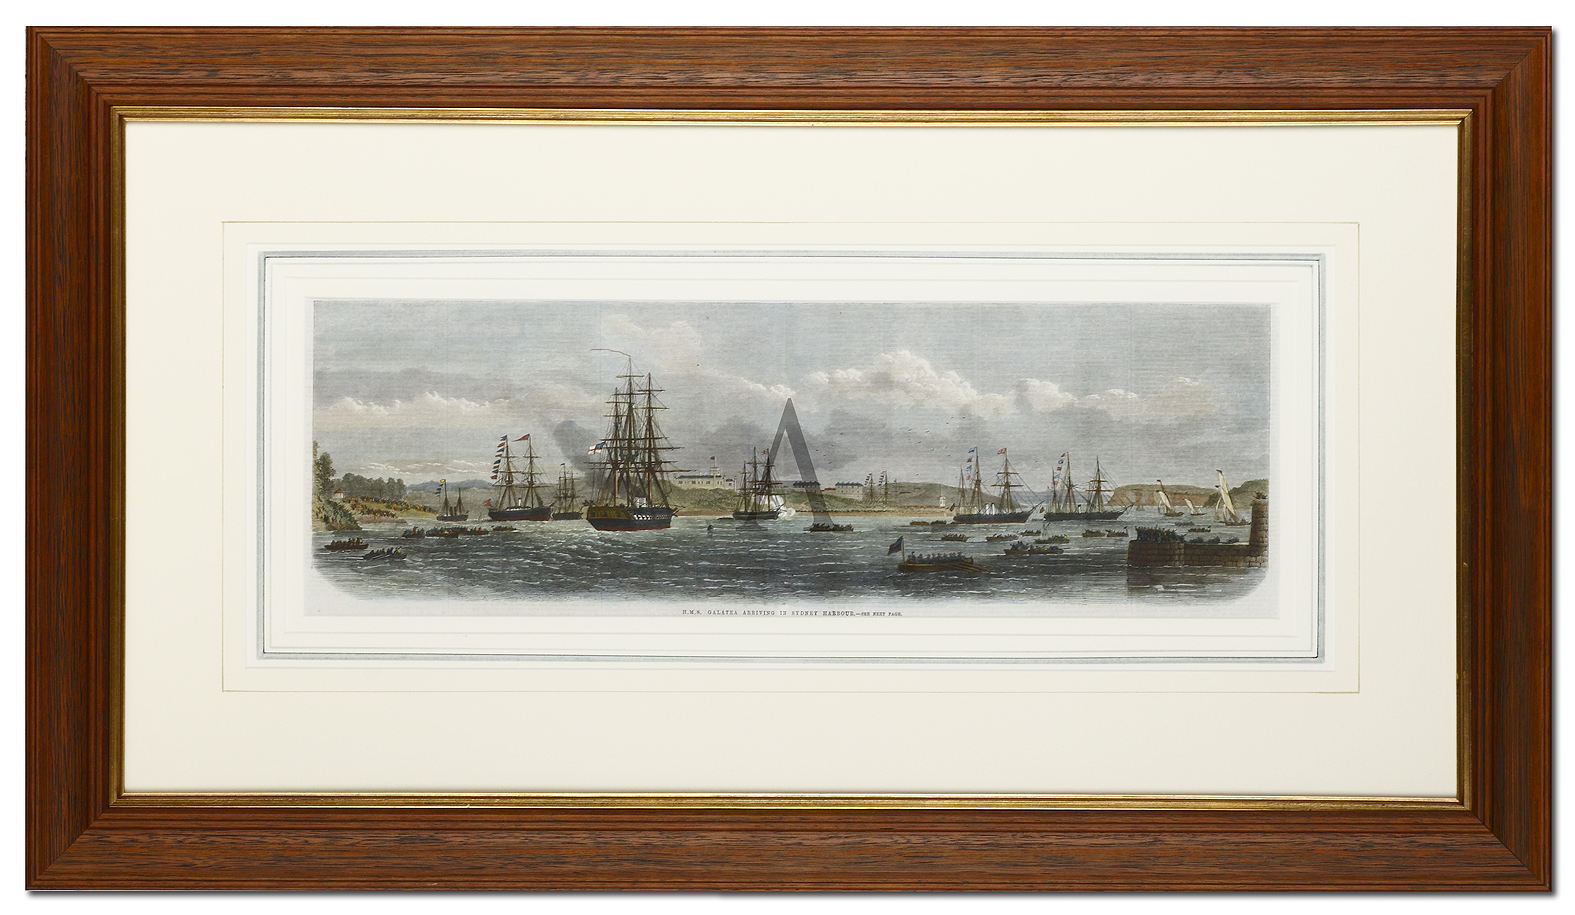 H.M.S. Galatea Arriving in Sydney Harbour - Antique Print from 1868